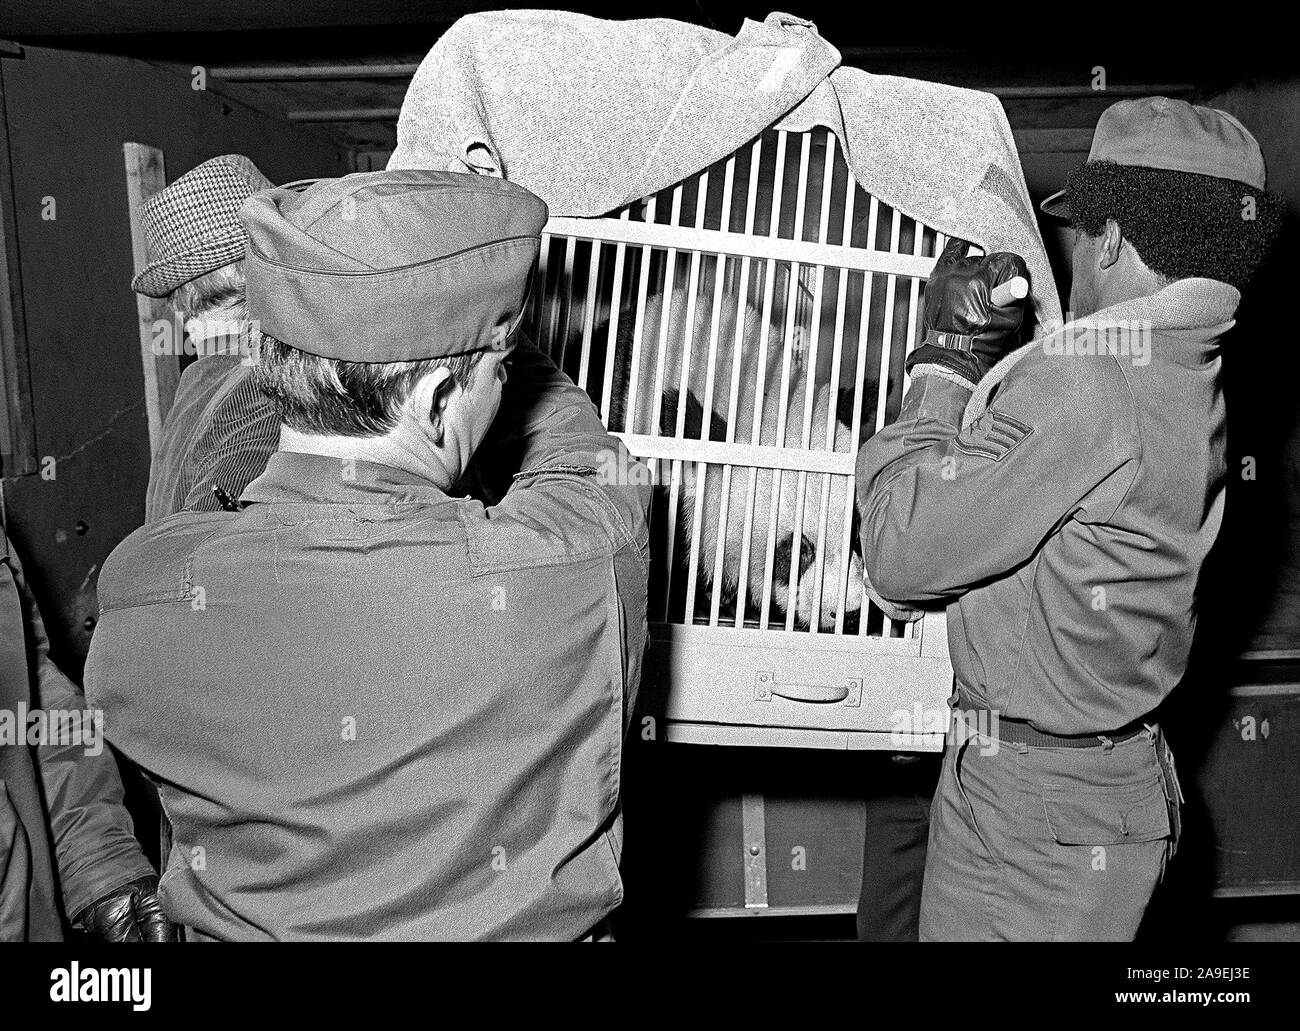 Airmen unload Tian Tian from a C-130 Hercules aircraft at Tempelhof Central Airport.  The U.S. Air Force delivered the panda bears Bao Bao and Tian Tian to West Berlin from China. Stock Photo